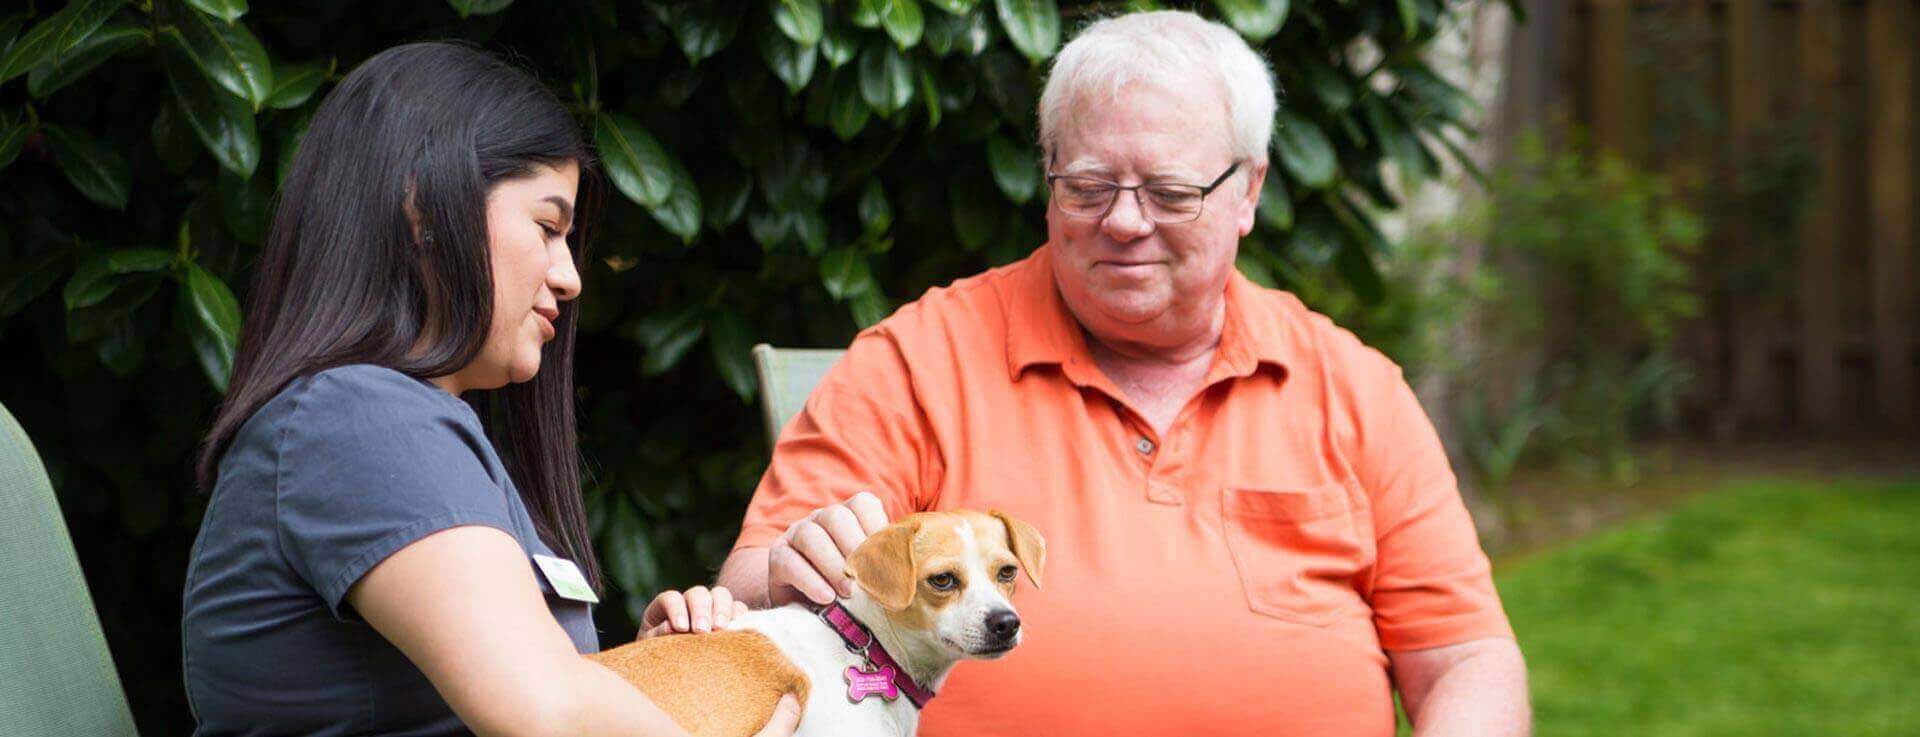 Caregiver and man sitting outside petting puppy